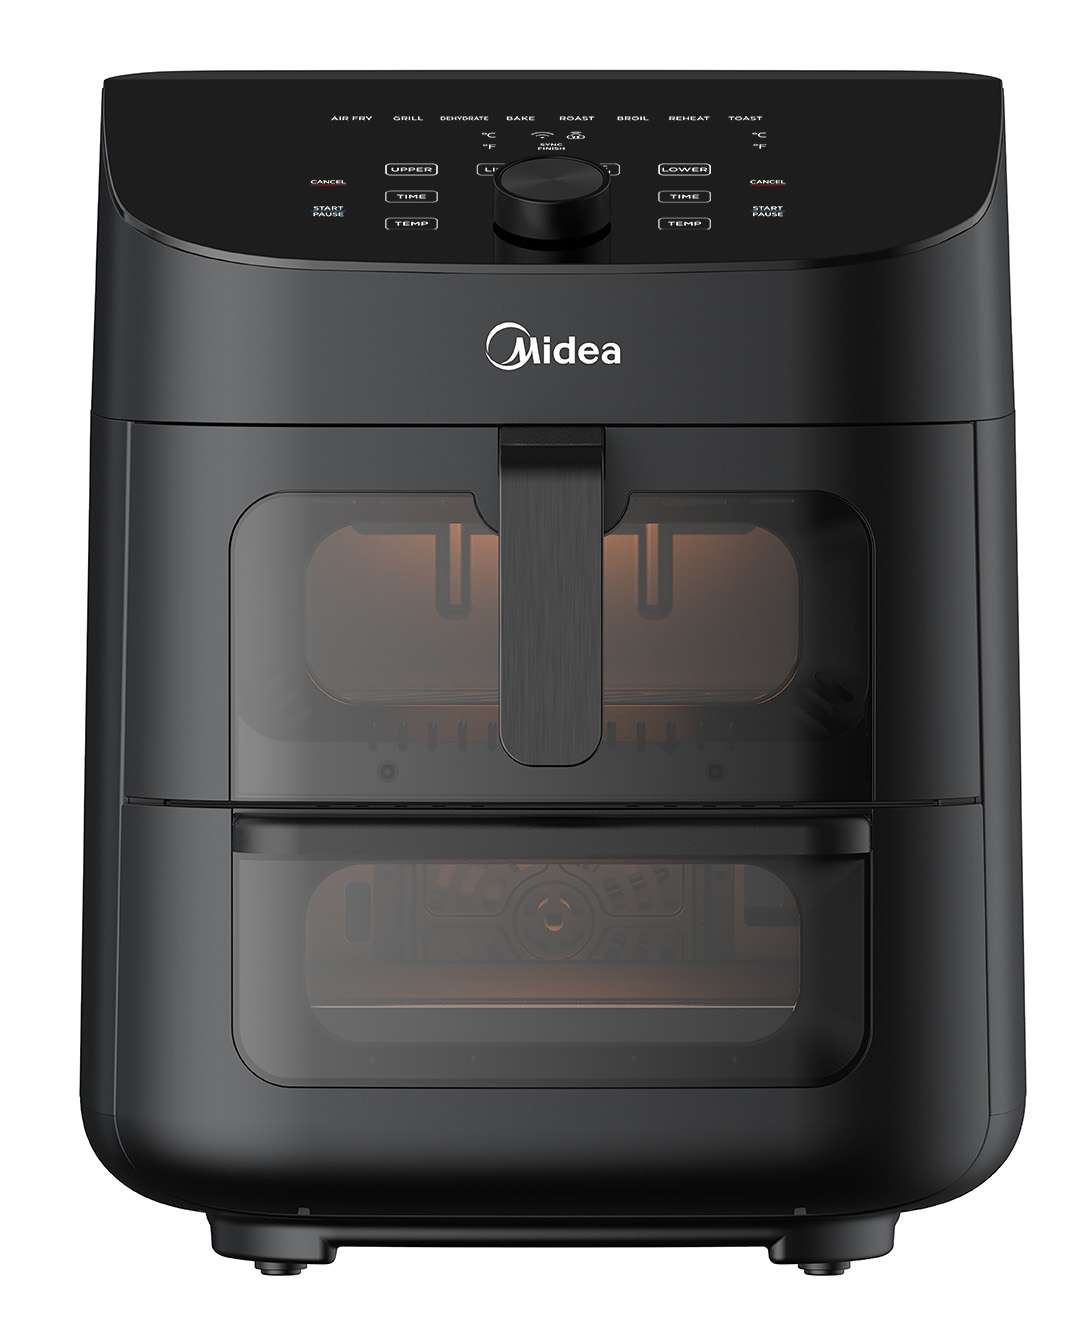  8-In-1 Midea 11QT Two-Zone Air Fryer Oven